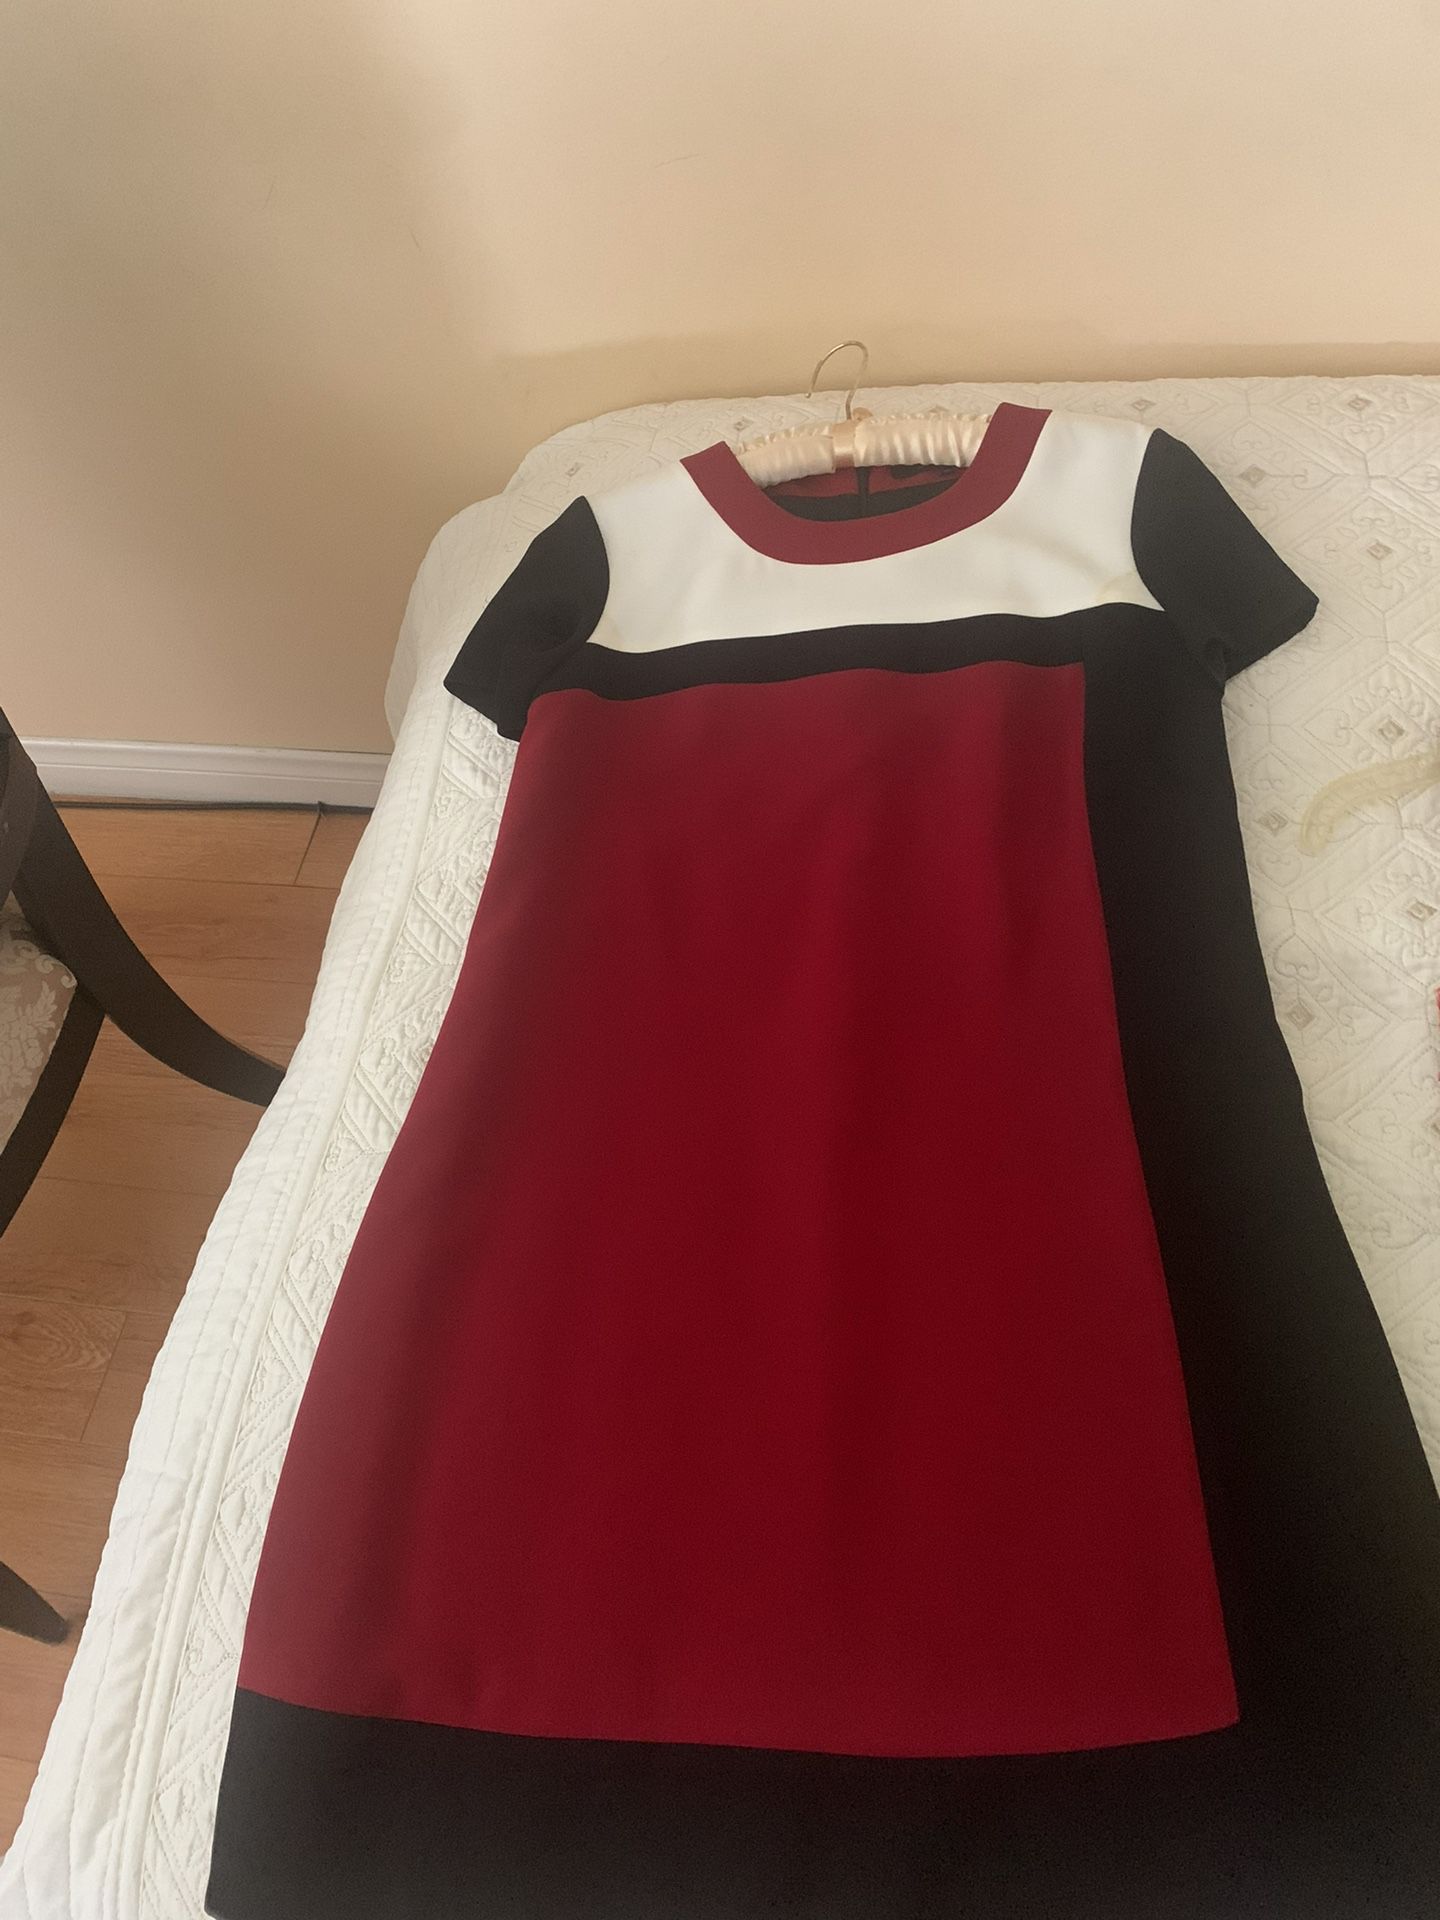 Red, Black And White Nice Dress 